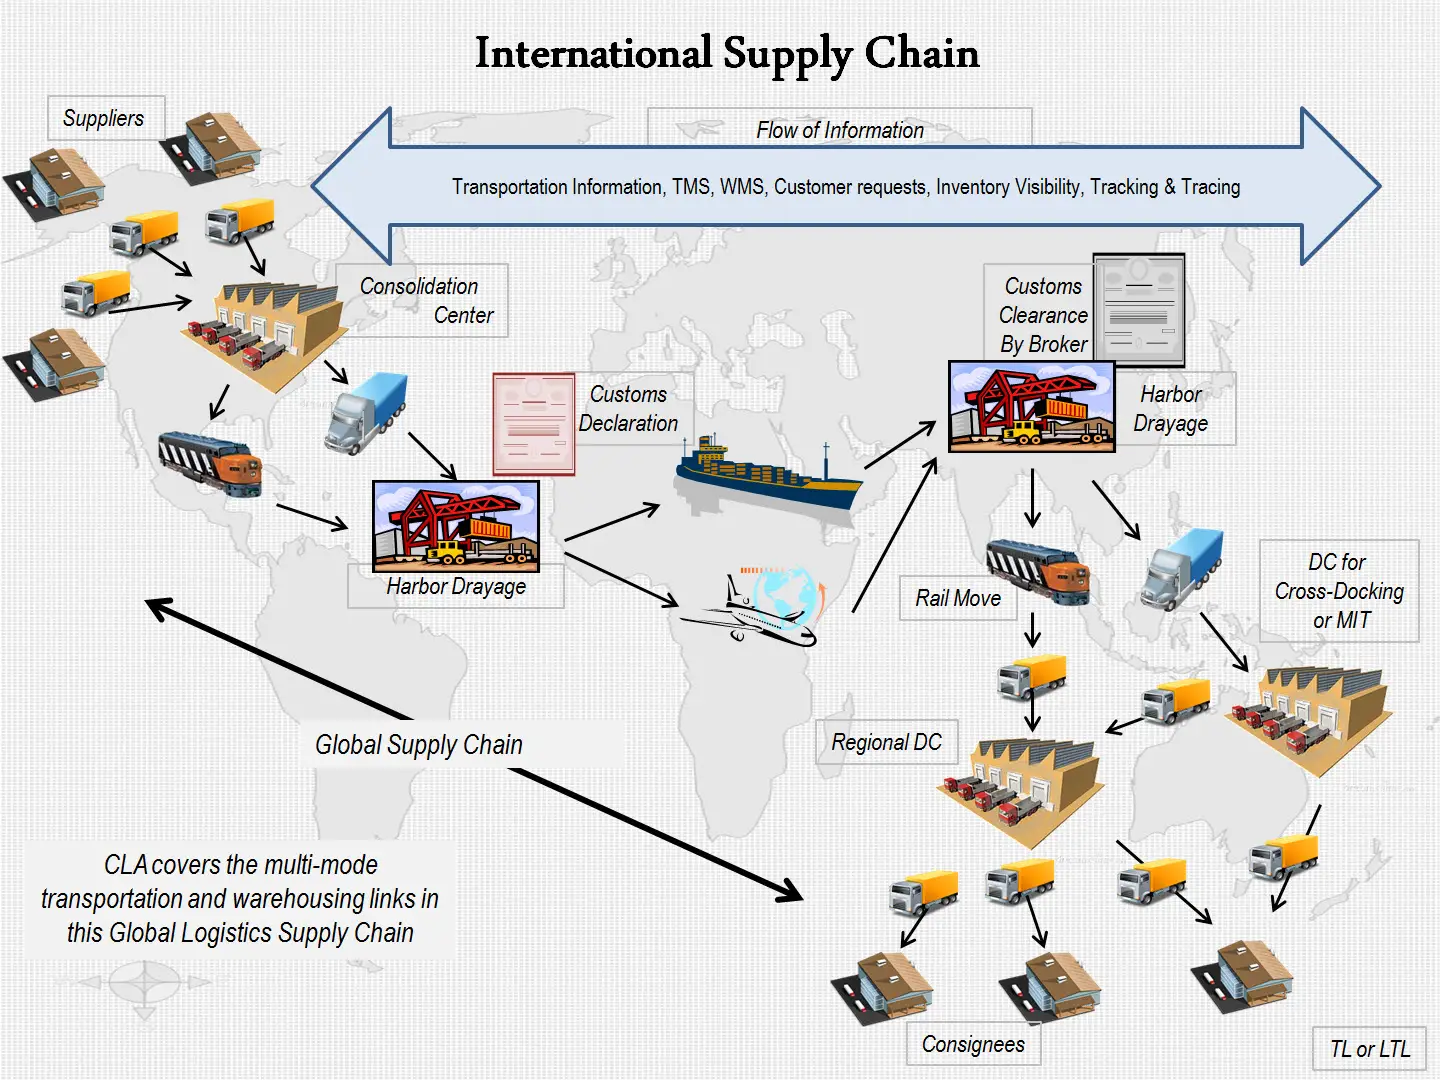 The international supply chain diagram of Costco comprises a combination of several actors and several freight methods including ships, rails, and trucks.